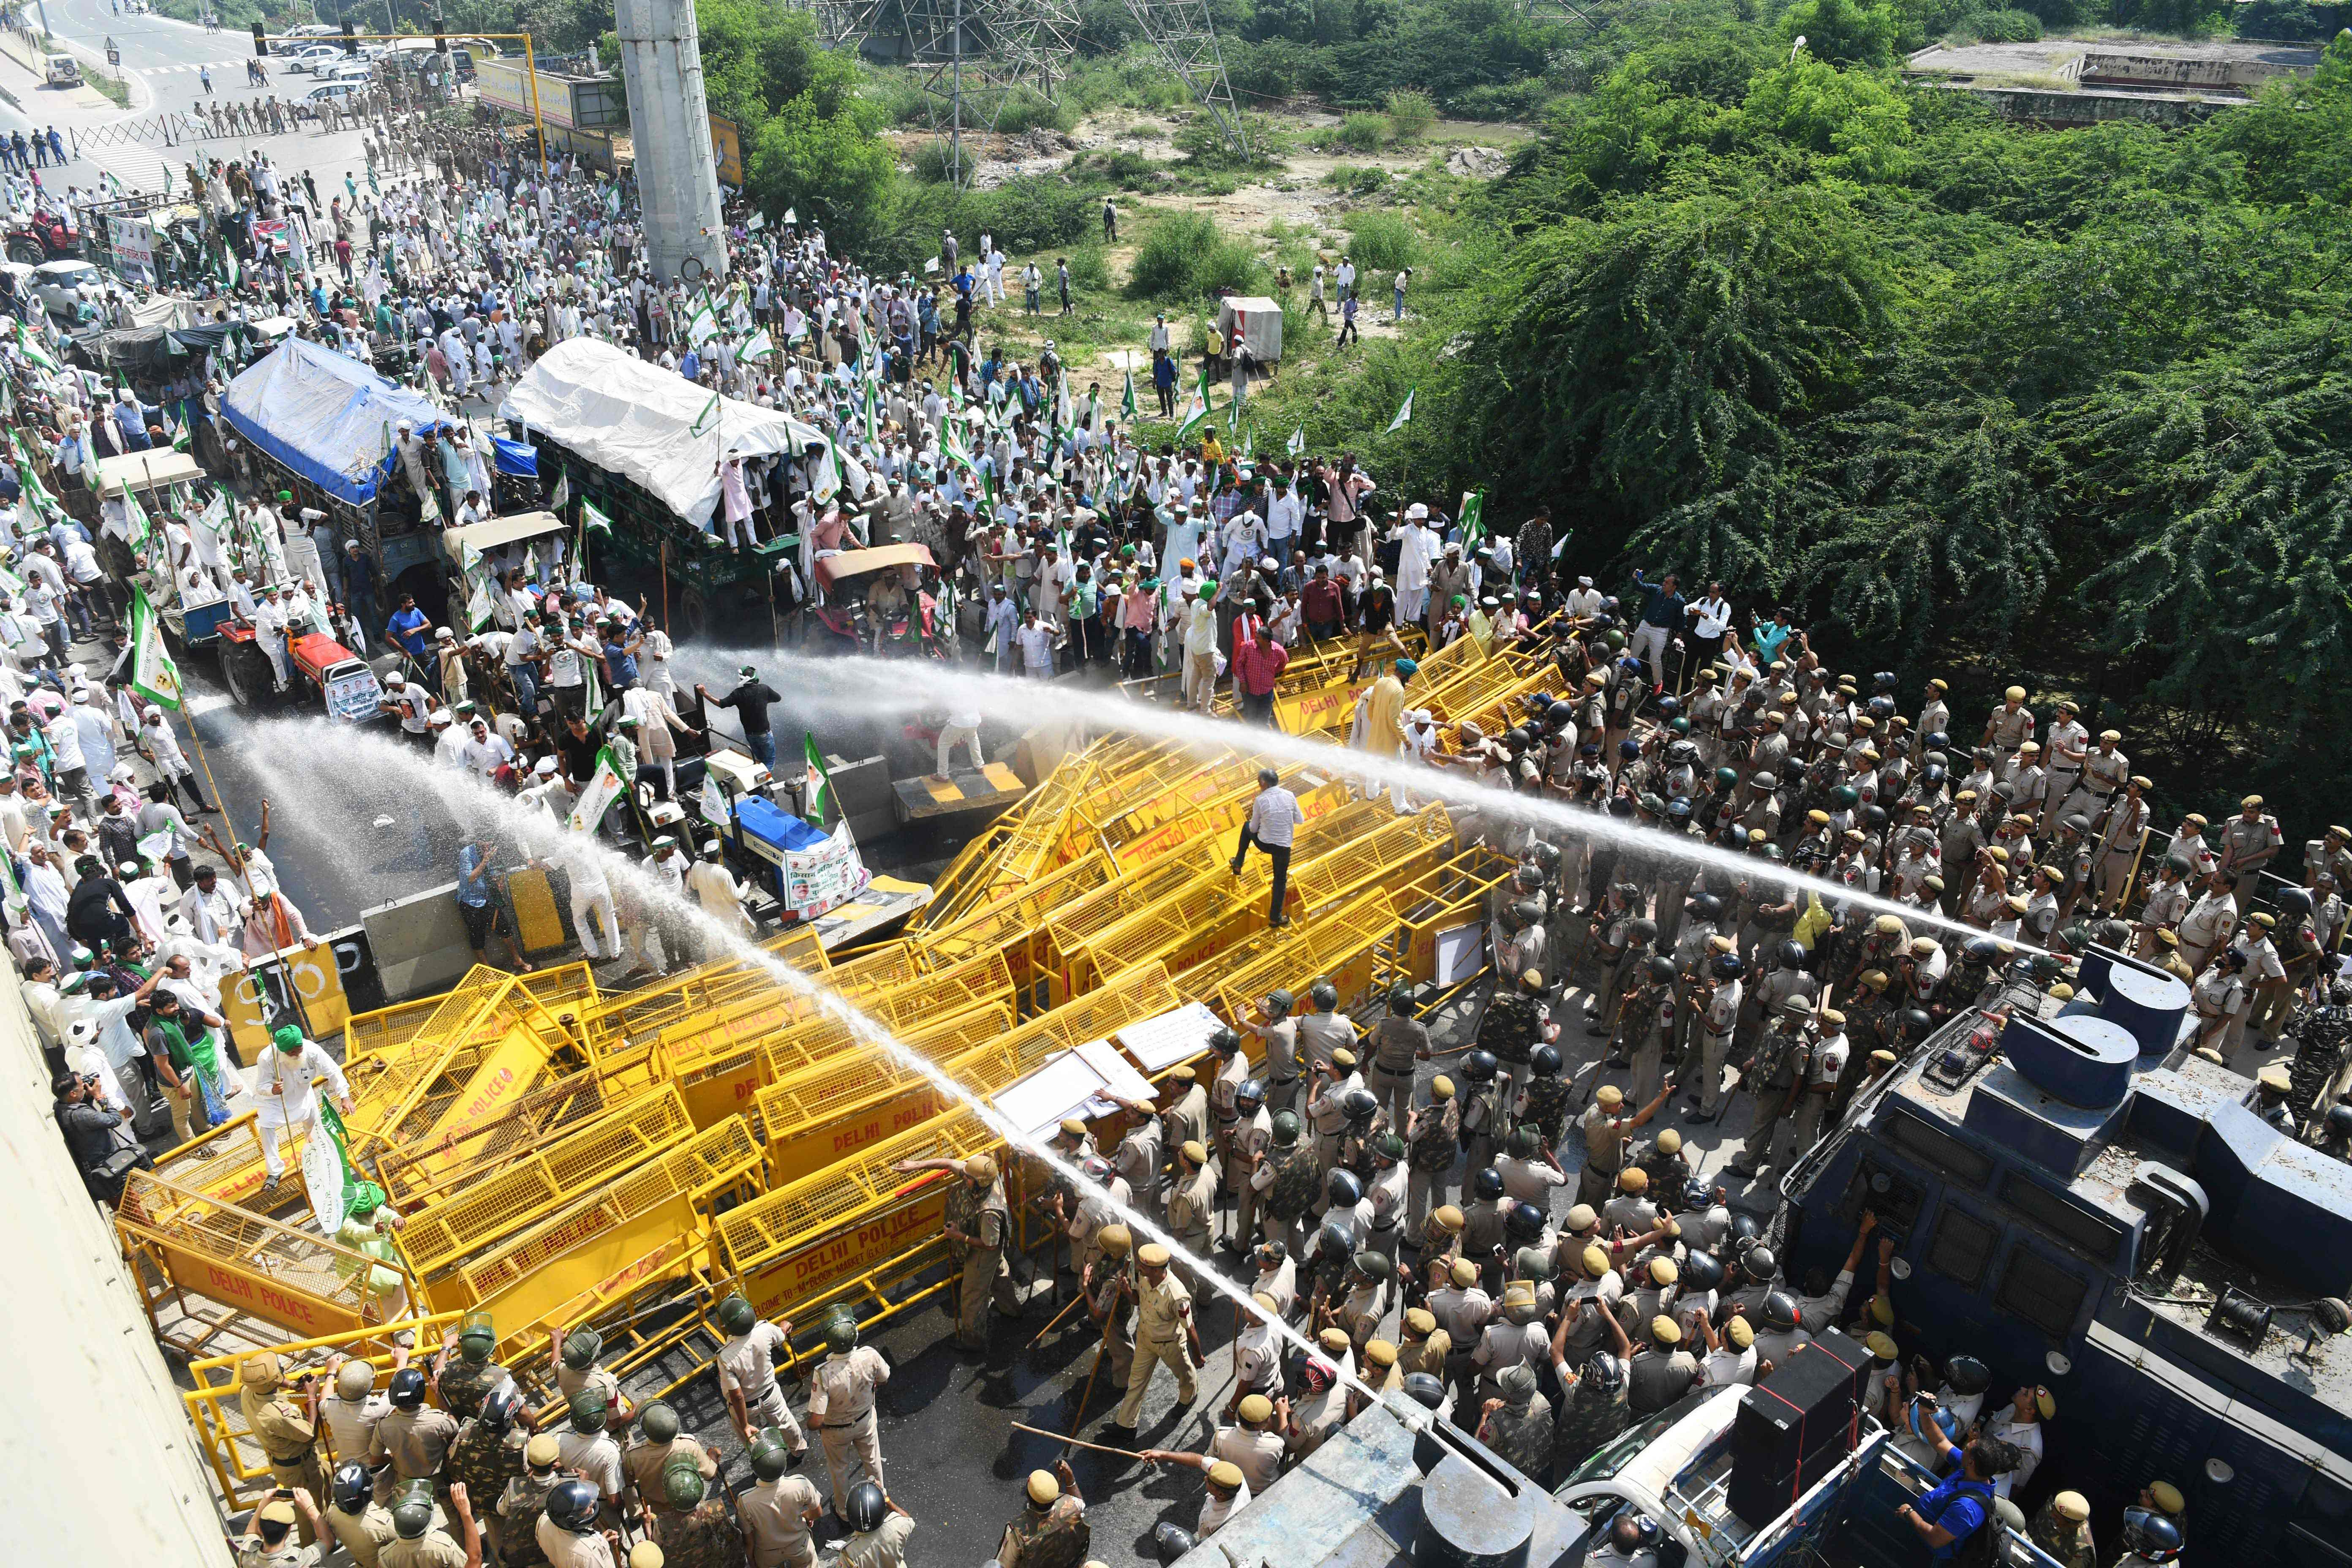 Police use water canons to disperse and stop farmers activists of the Bhartiya Kisan Union at the border with Ghazipur during their march to New Delhi (AFP)